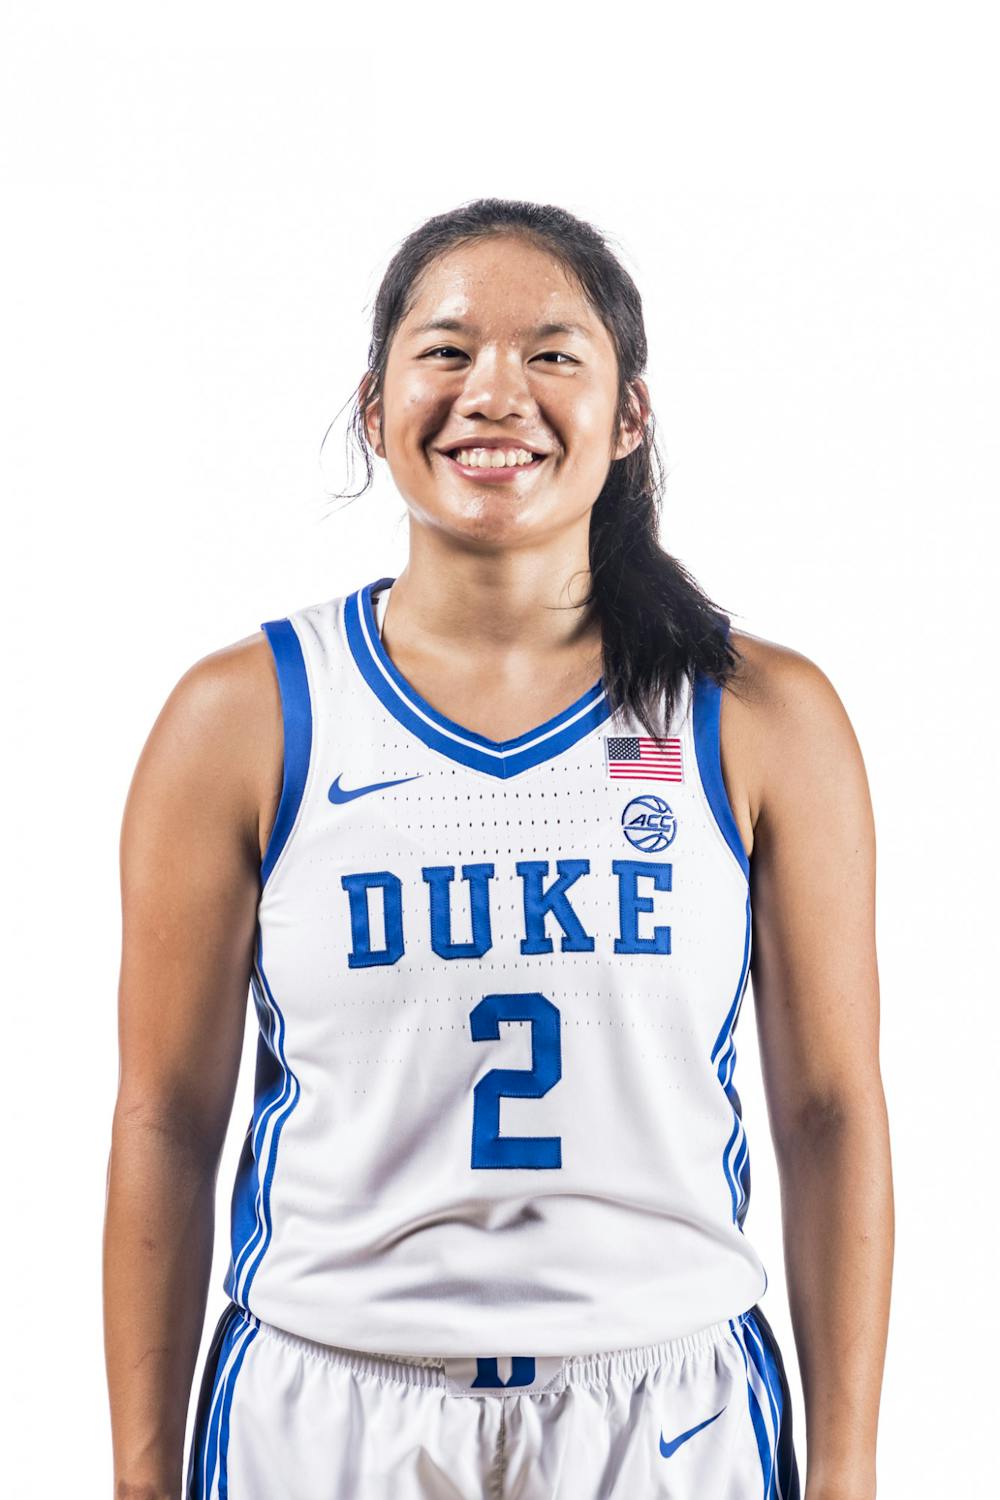 De Jesus figures to be Duke's starting point guard this year.